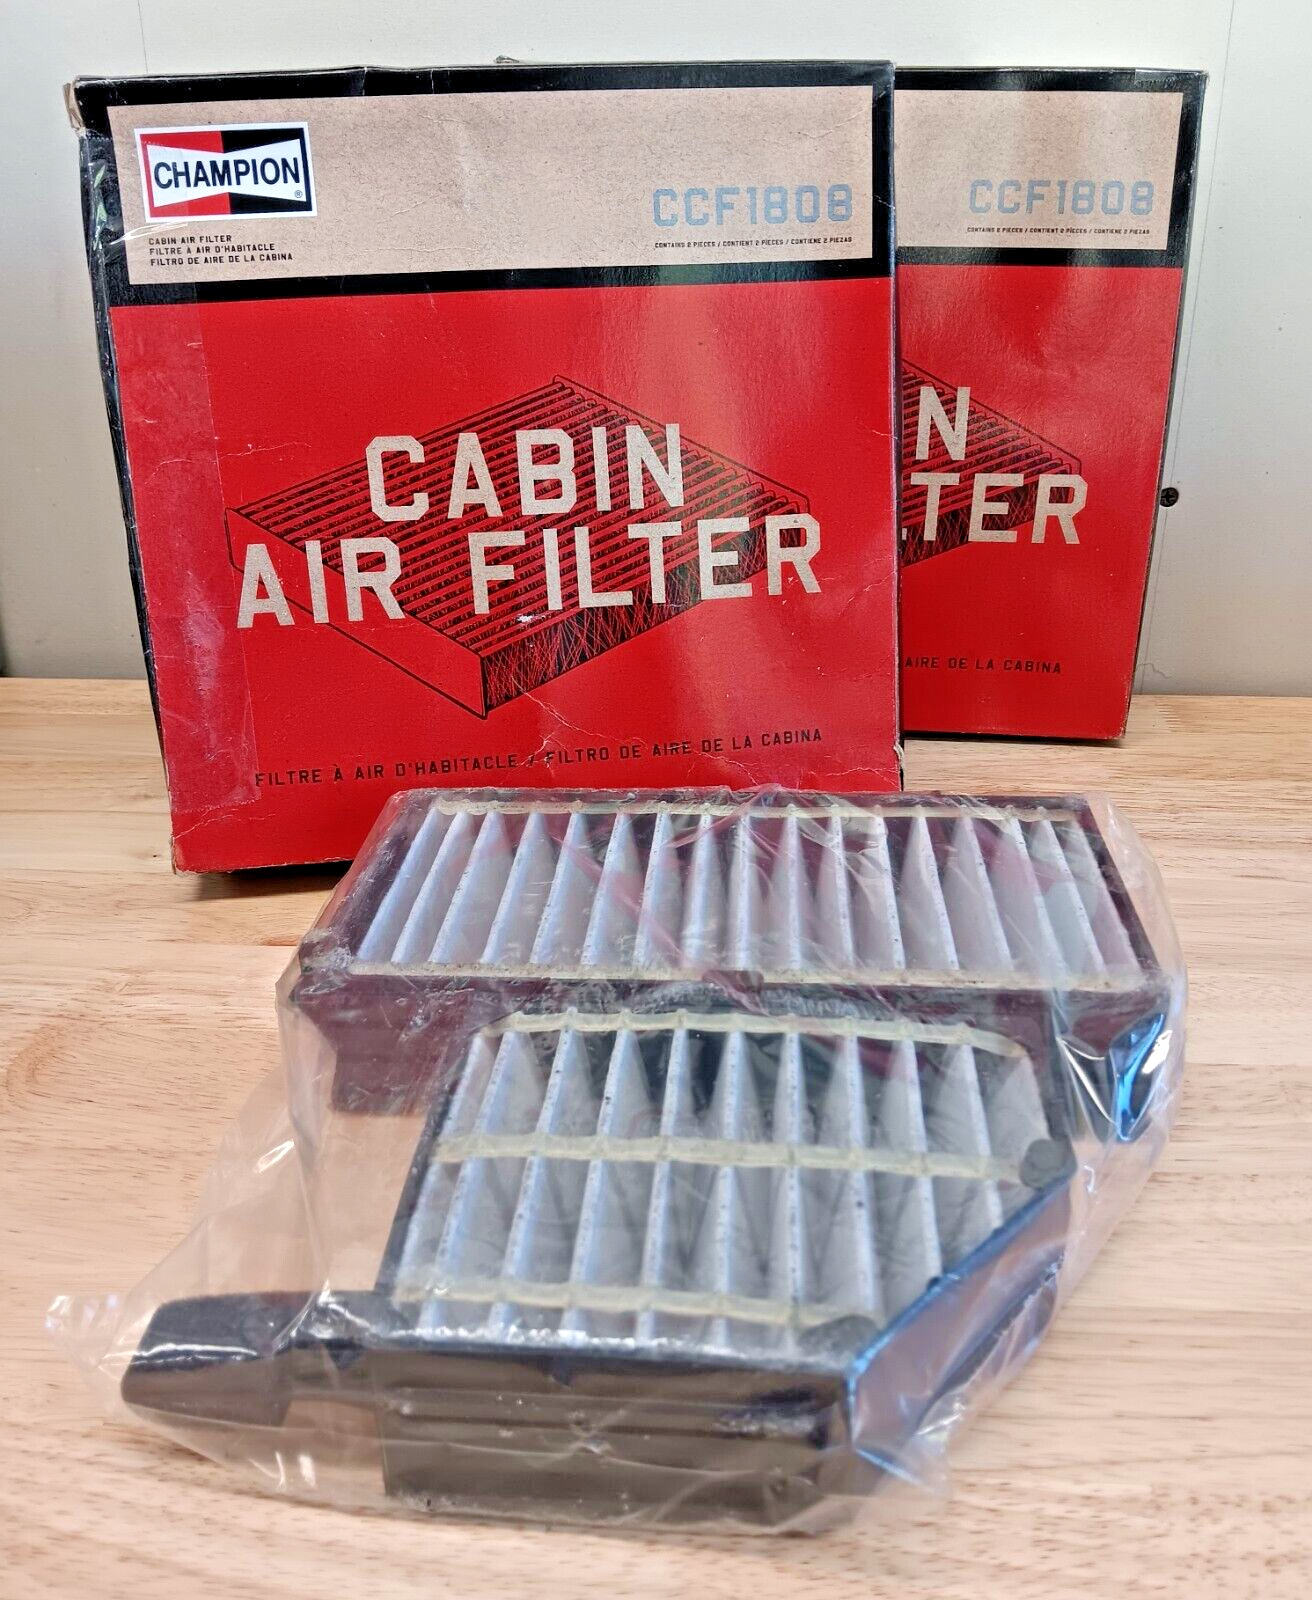 TWO SETS of Champion CCF1808 Cabin Air Filters for CF10383 XC35872 3666 PC5872